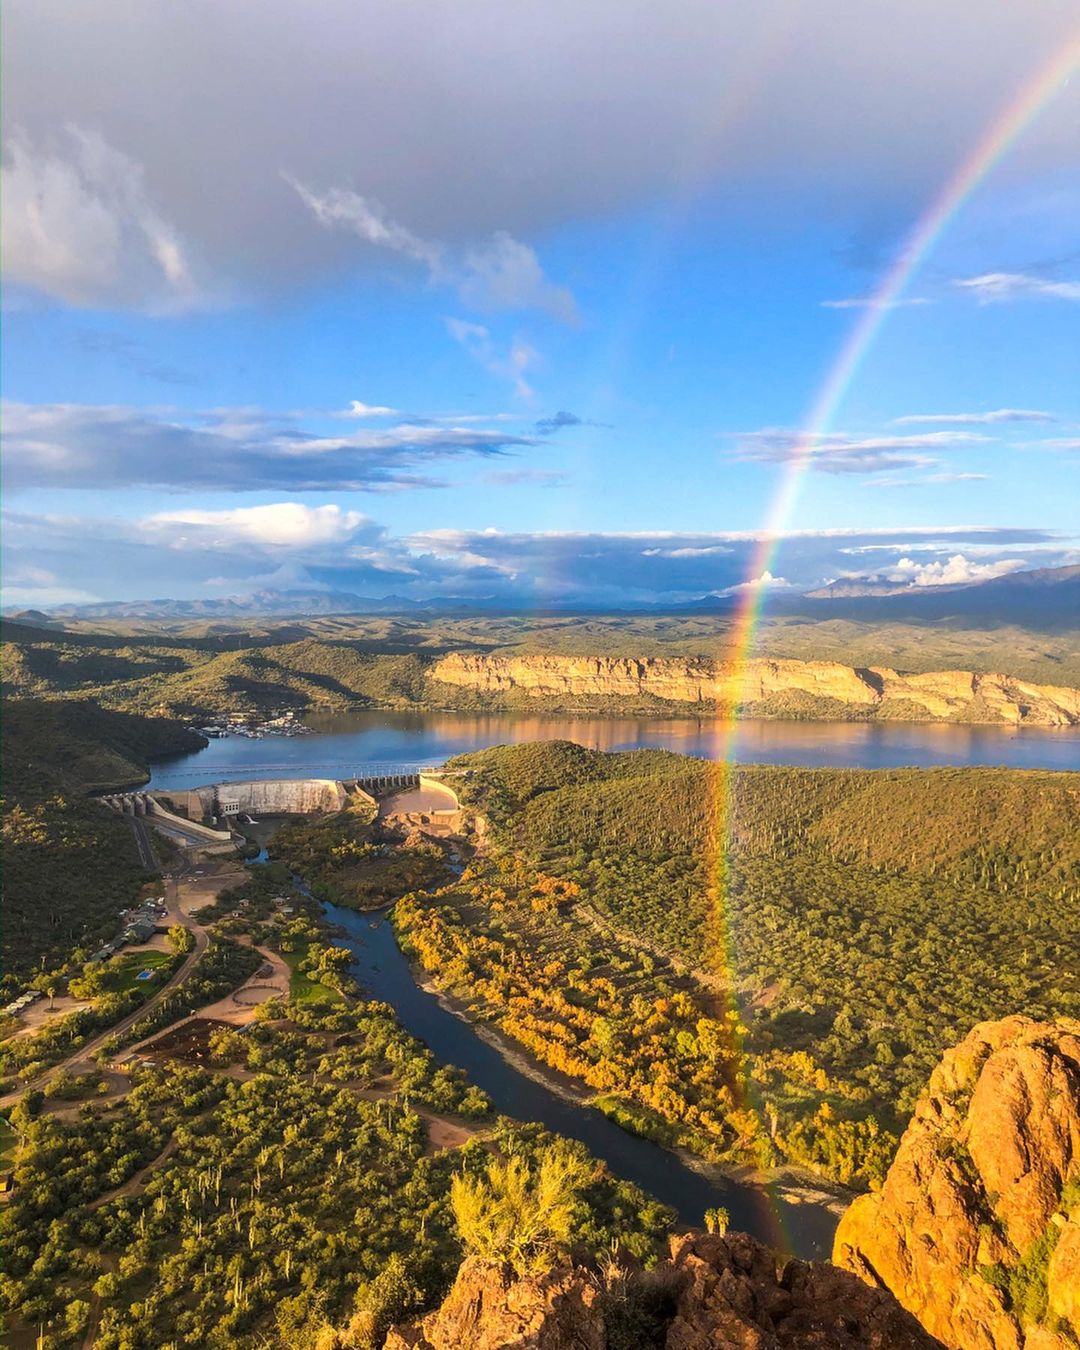 Photo of Saguaro Lake Guest Ranch with a Double Rainbow Visible. Photo by Instagram user @saguarolakeranch